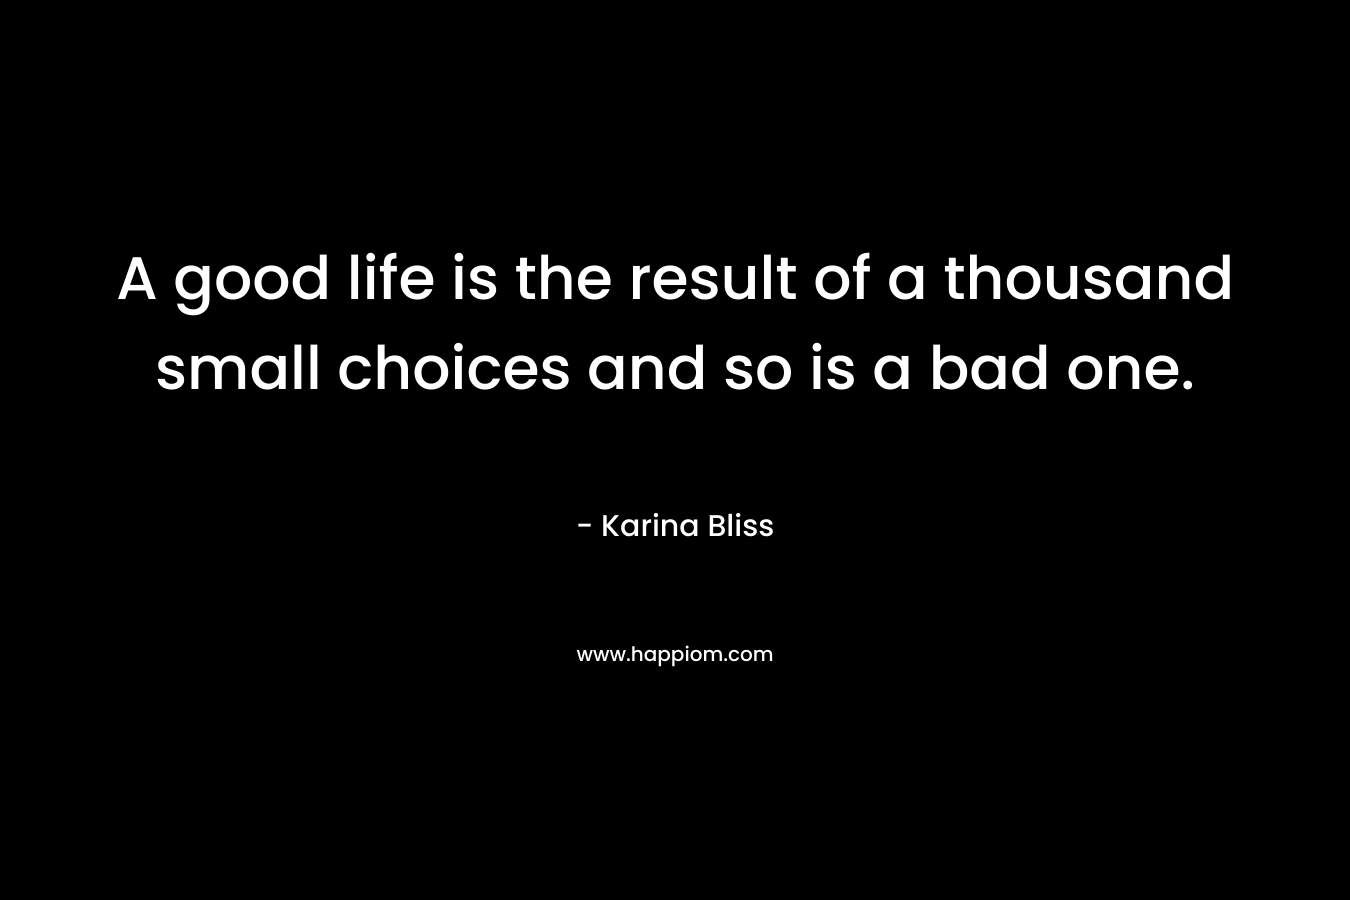 A good life is the result of a thousand small choices and so is a bad one. – Karina Bliss